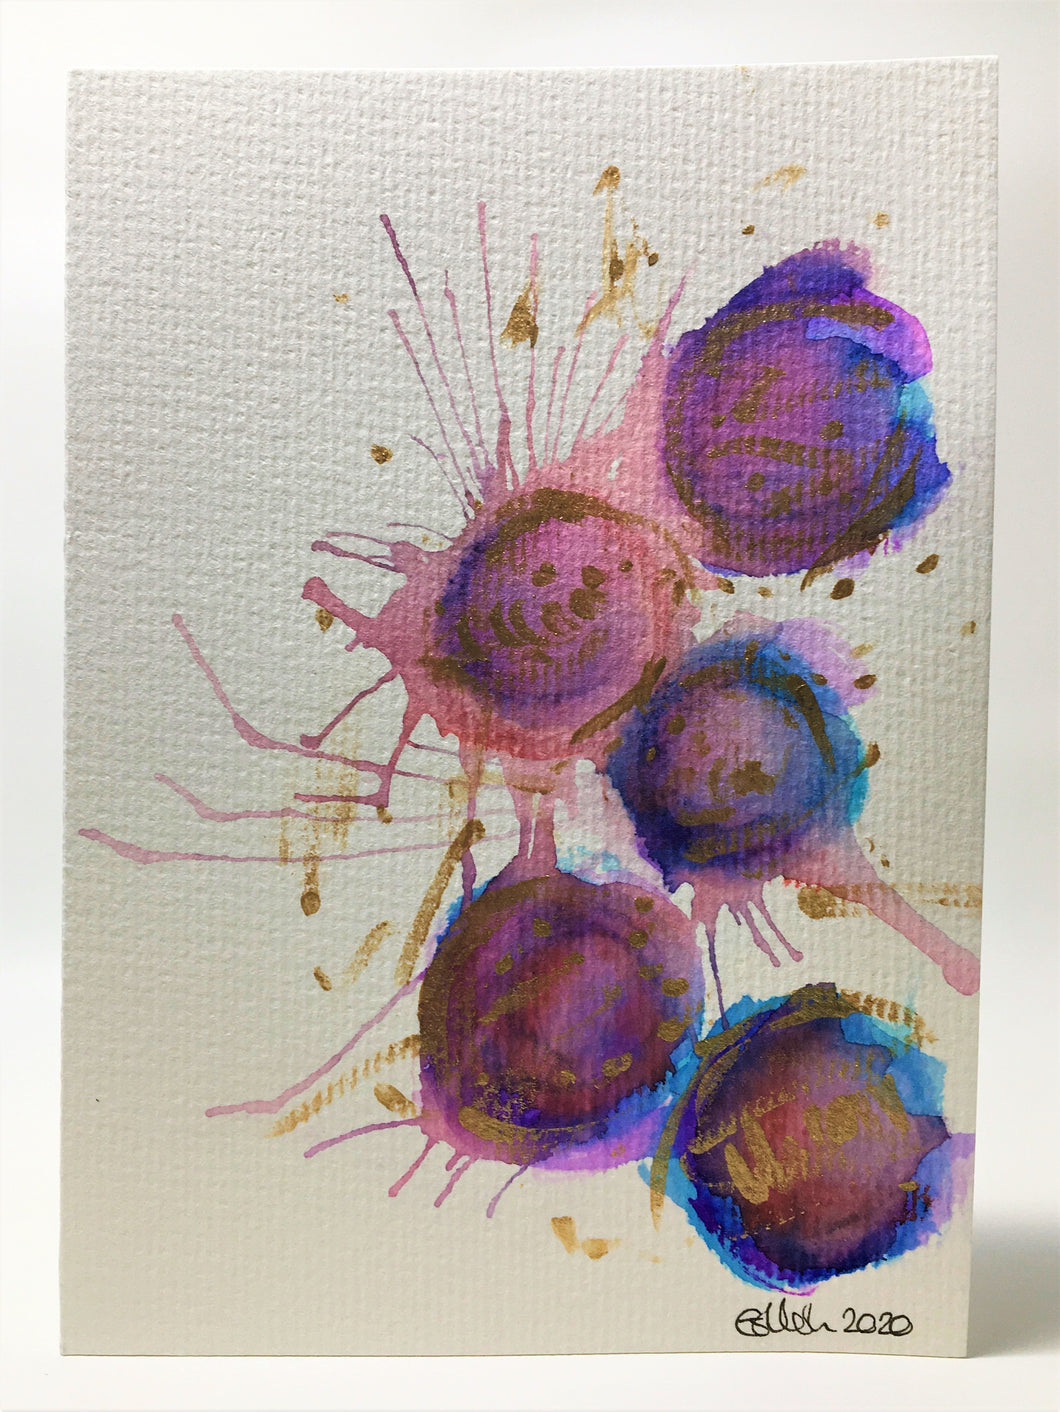 Original Hand Painted Christmas Card - Bauble Collection - Pink, Blue, Purple & Gold - eDgE dEsiGn London